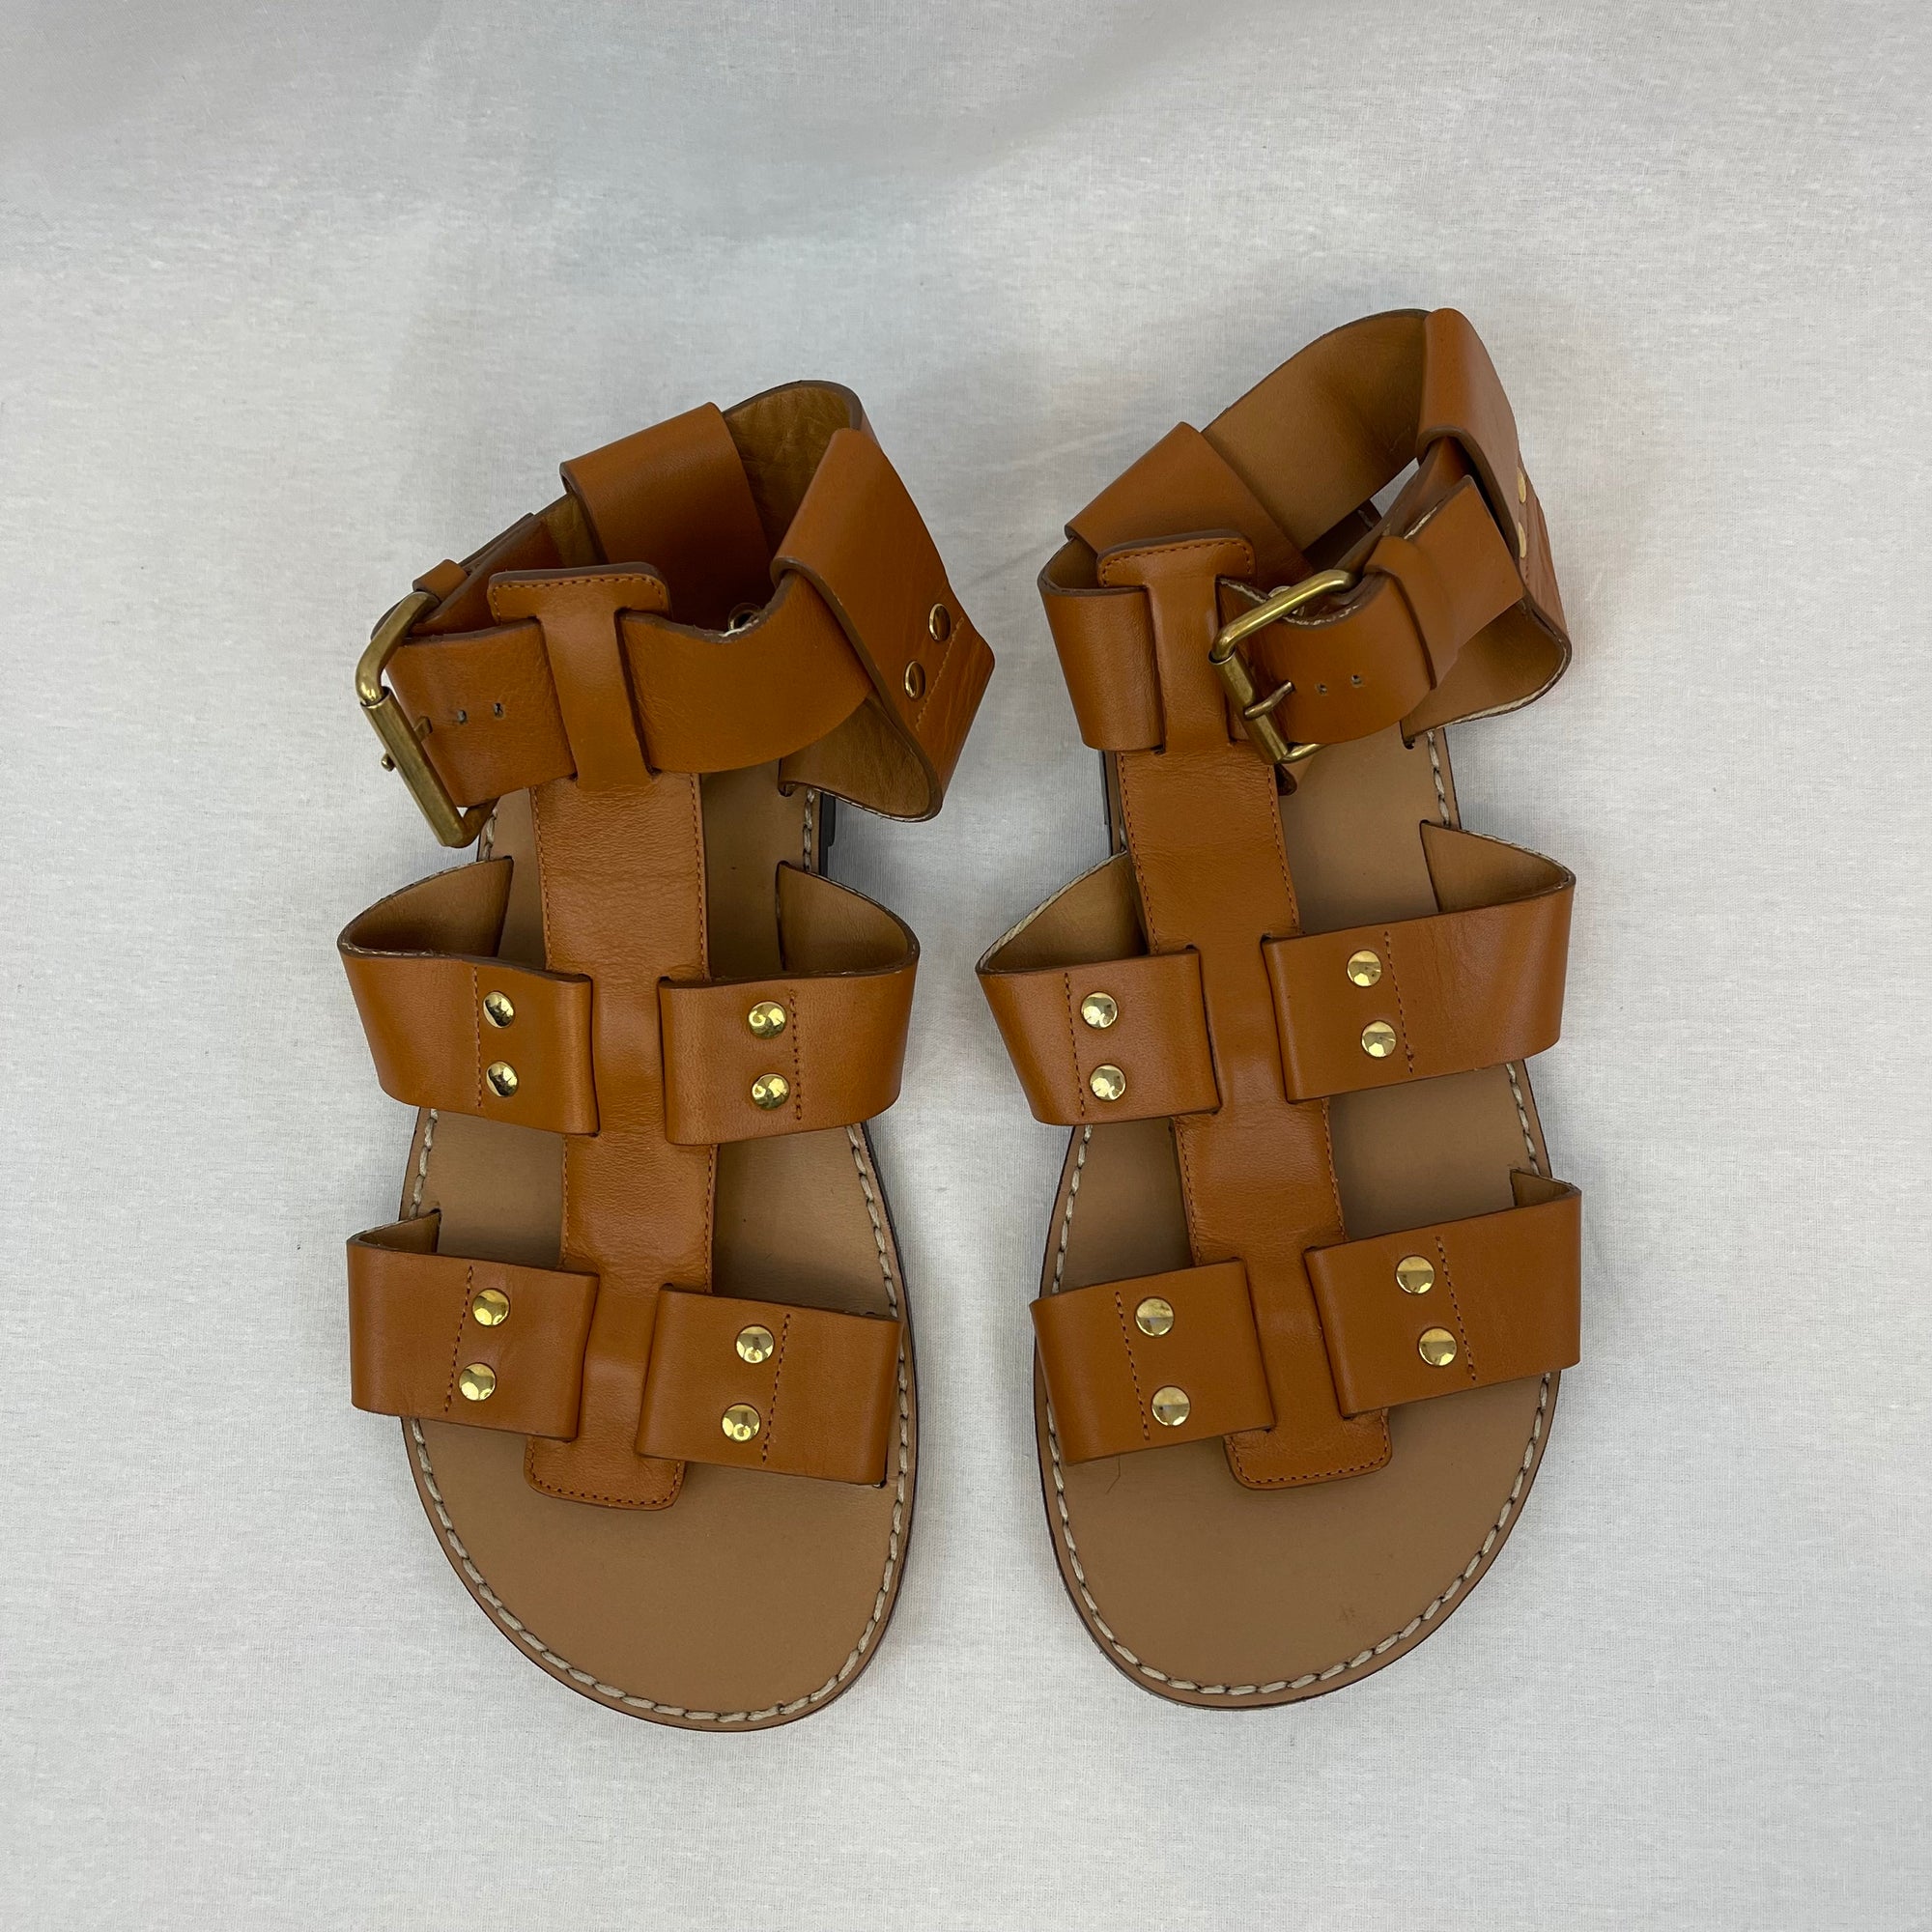 Chloe Brown Leather Gladiator Sandals size 36.5